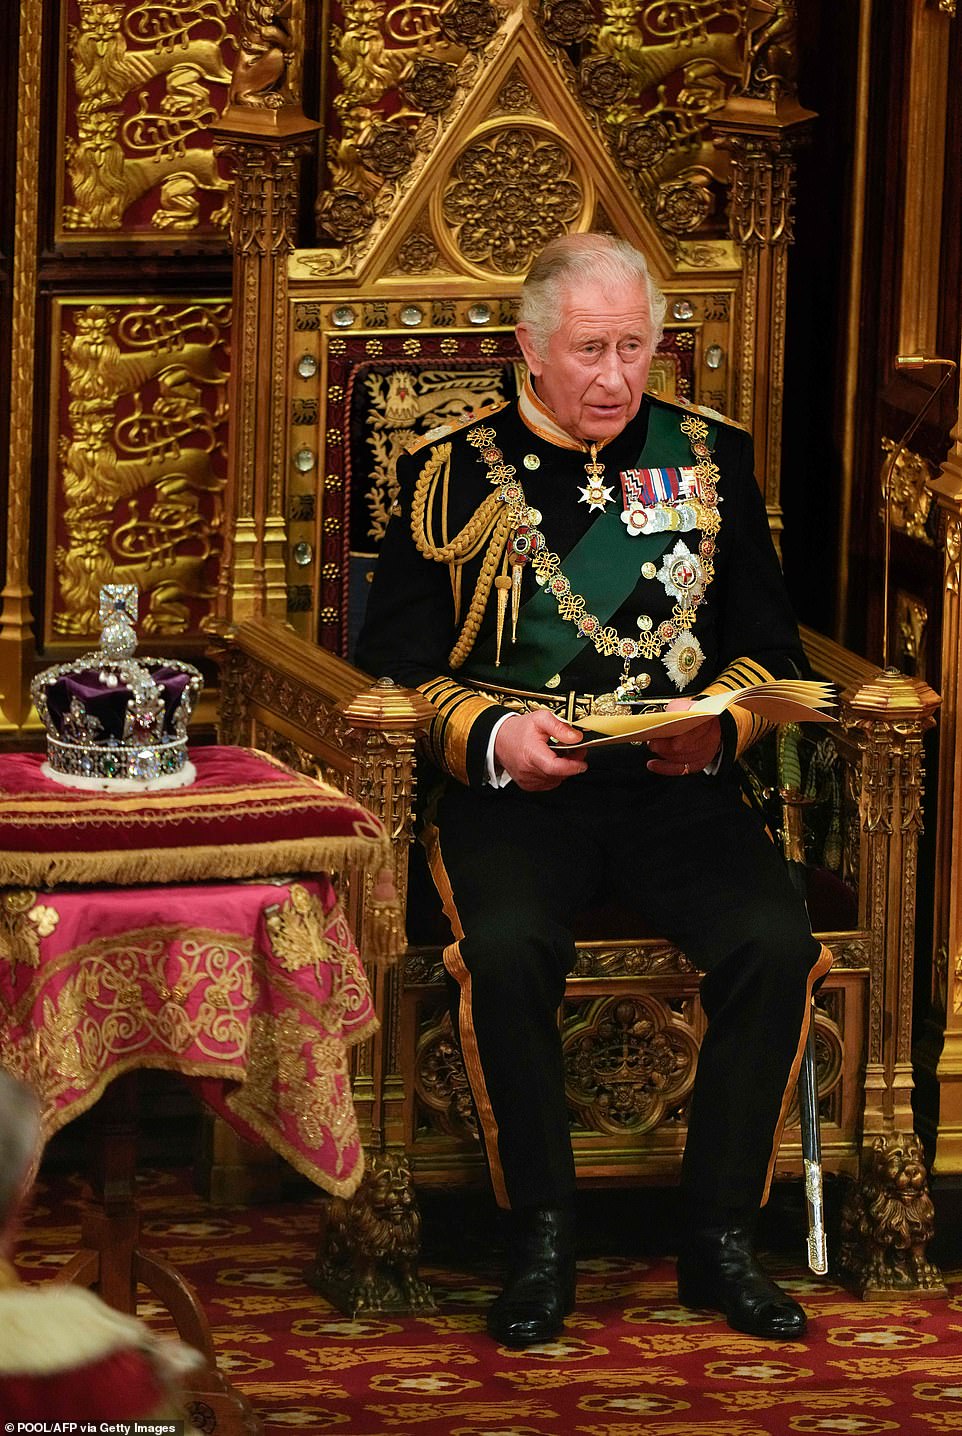 FAMILIA REAL BRITÁNICA - Página 2 57633181-10800447-Prince_Charles_read_the_relatively_short_speech_which_has_seen_a-m-39_1652181922625